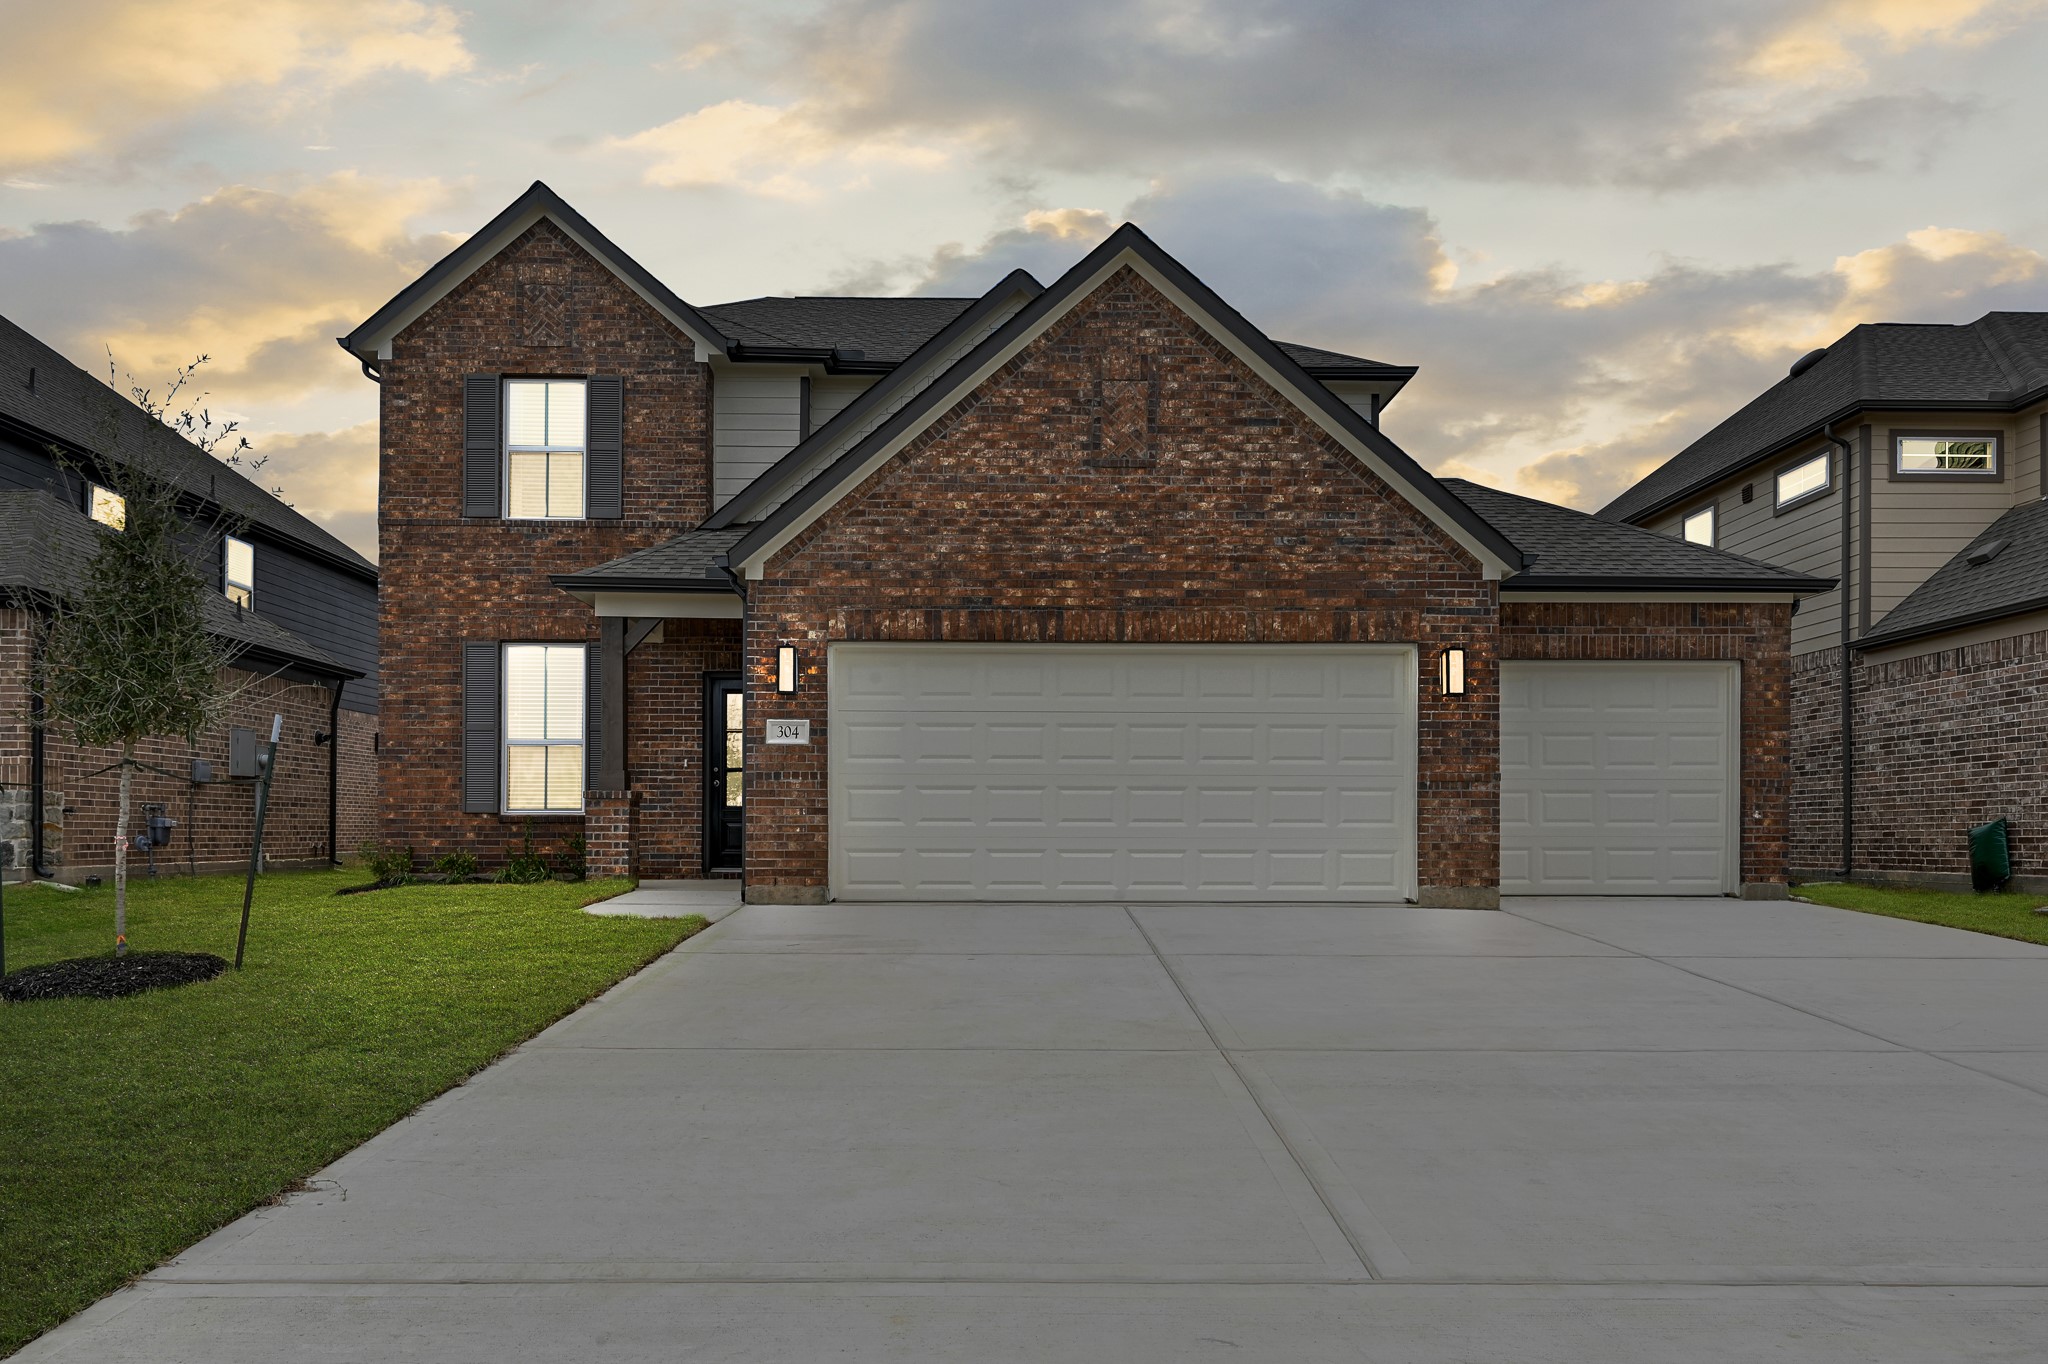 Welcome home to 304 West Tranquil Fields Lane located in Beacon Hill and zoned to Waller ISD.